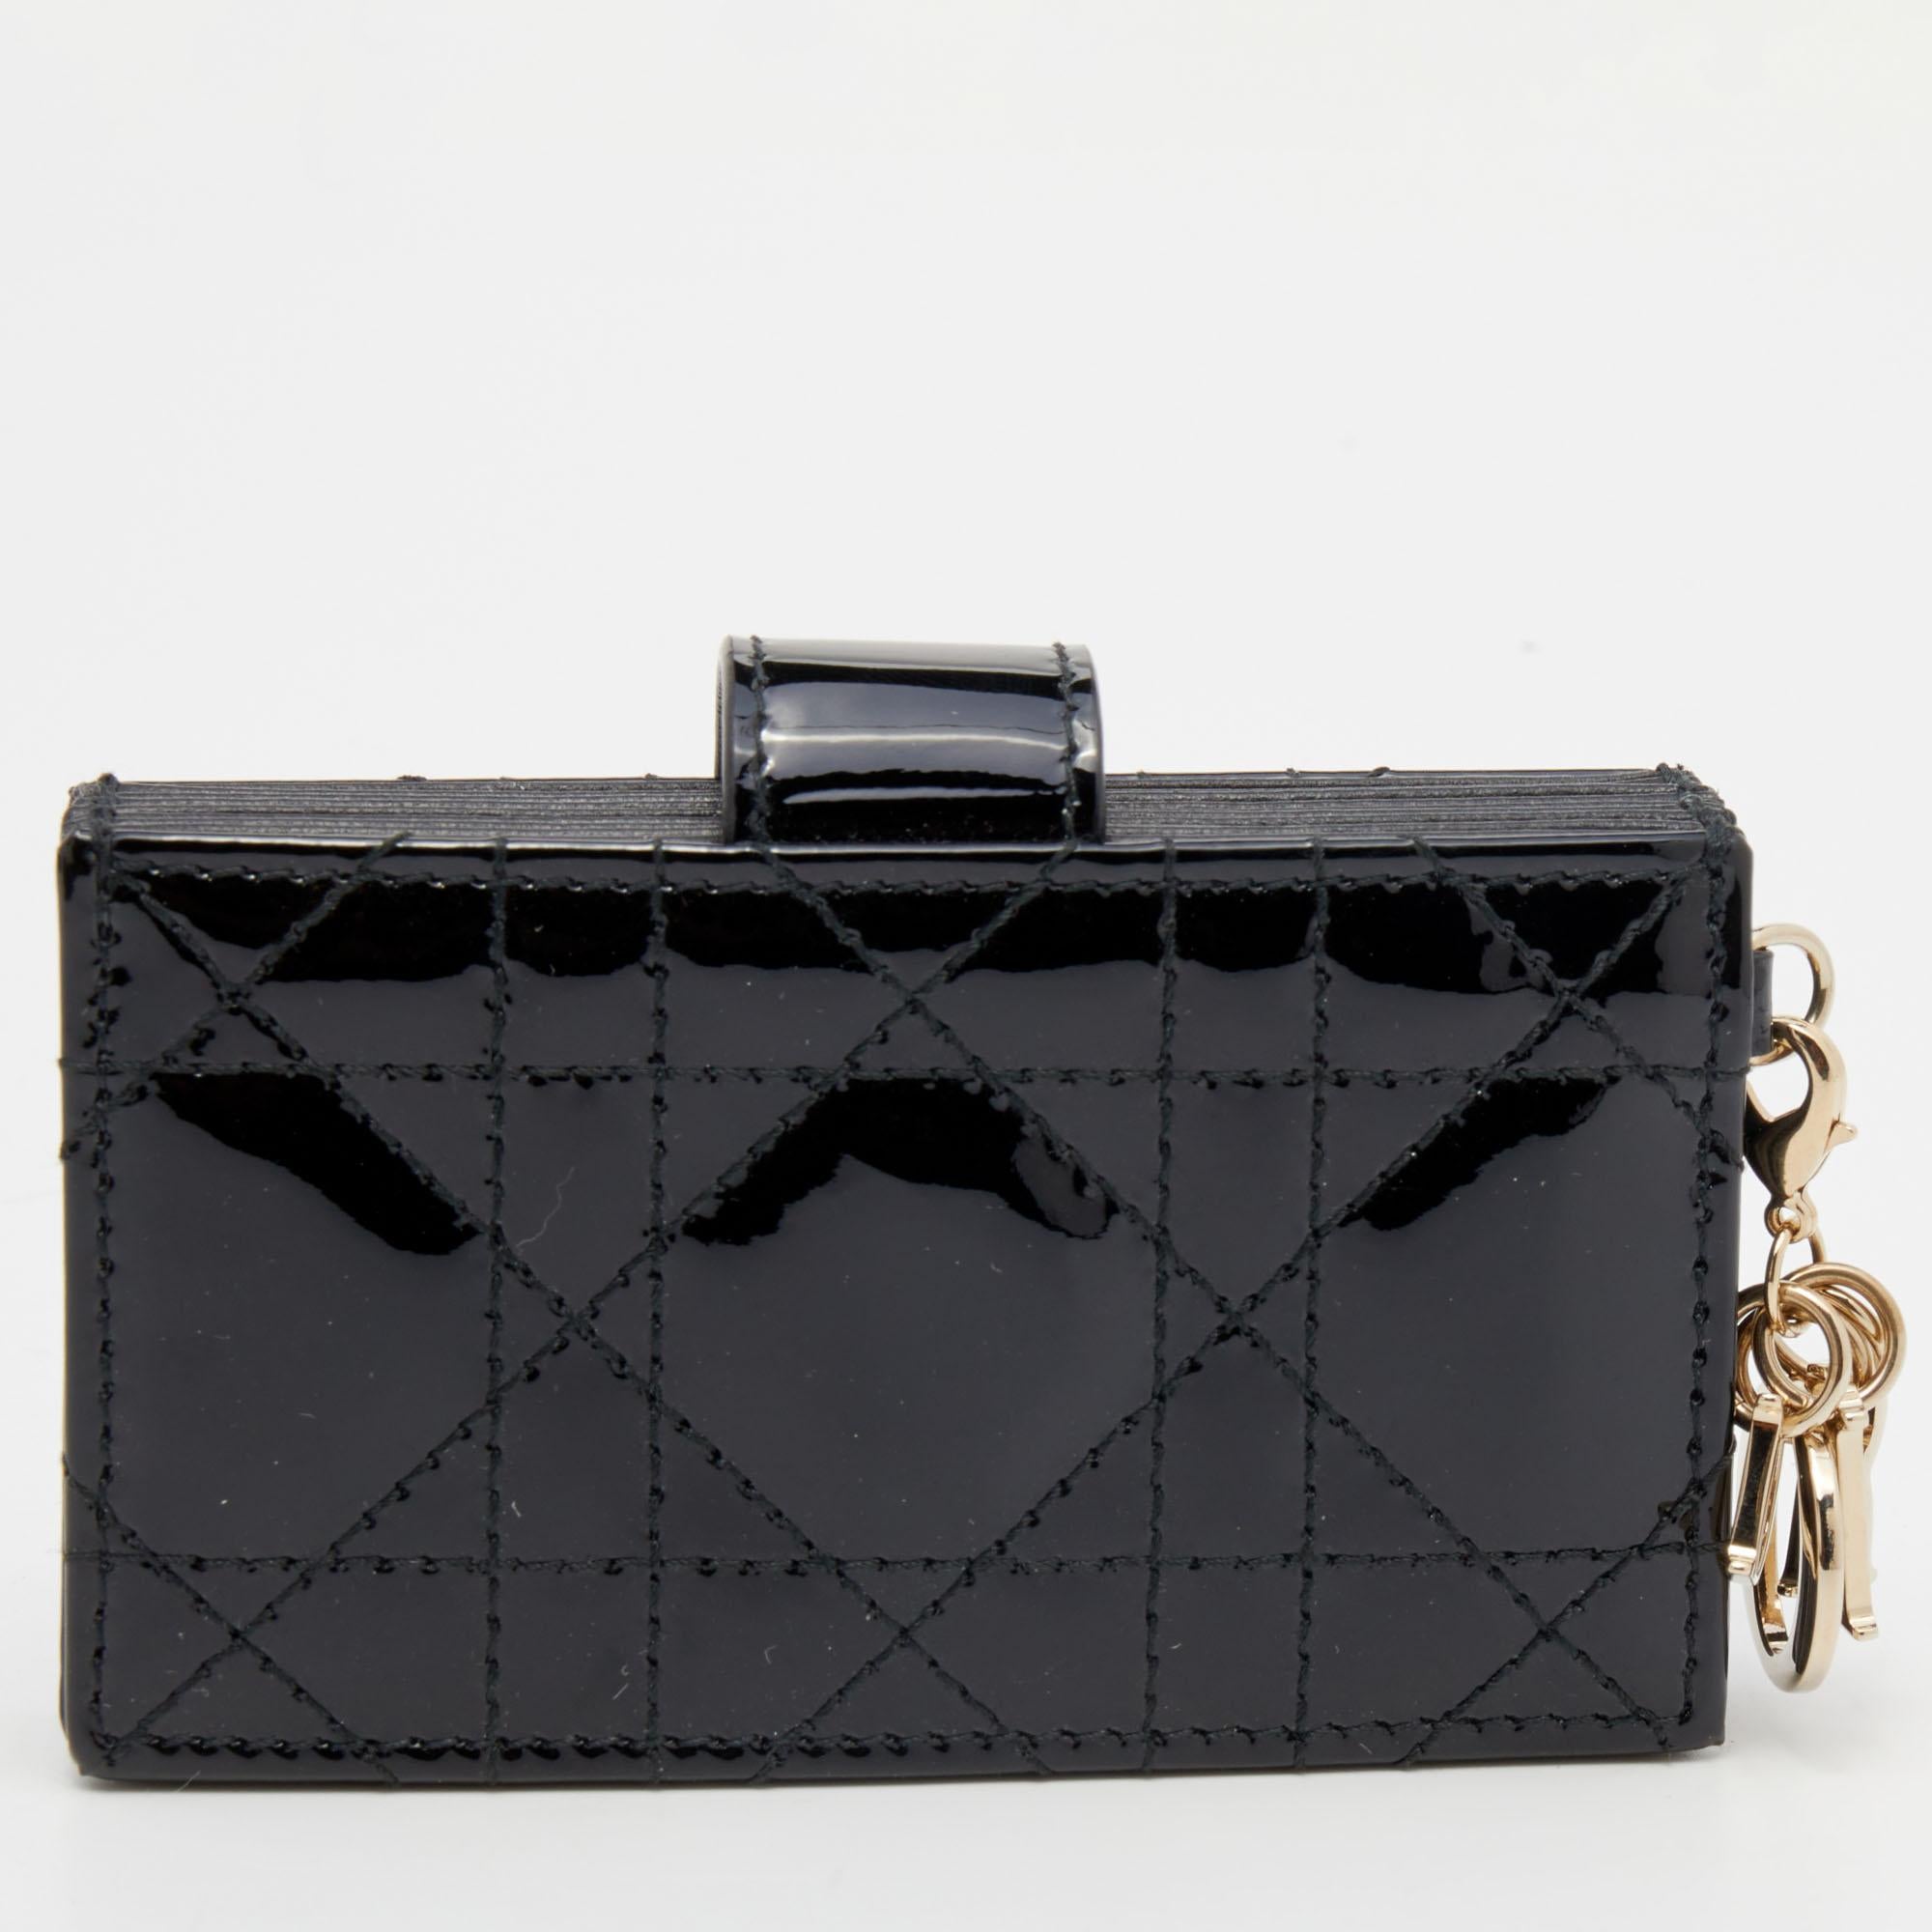 Crafted from patent leather, this Dior gusset cardholder opens to reveal multiple compartments to carry your cards neatly. It also features the brand's iconic Cannage quilt on the exterior. This piece in black is finished with gold-tone hardware and